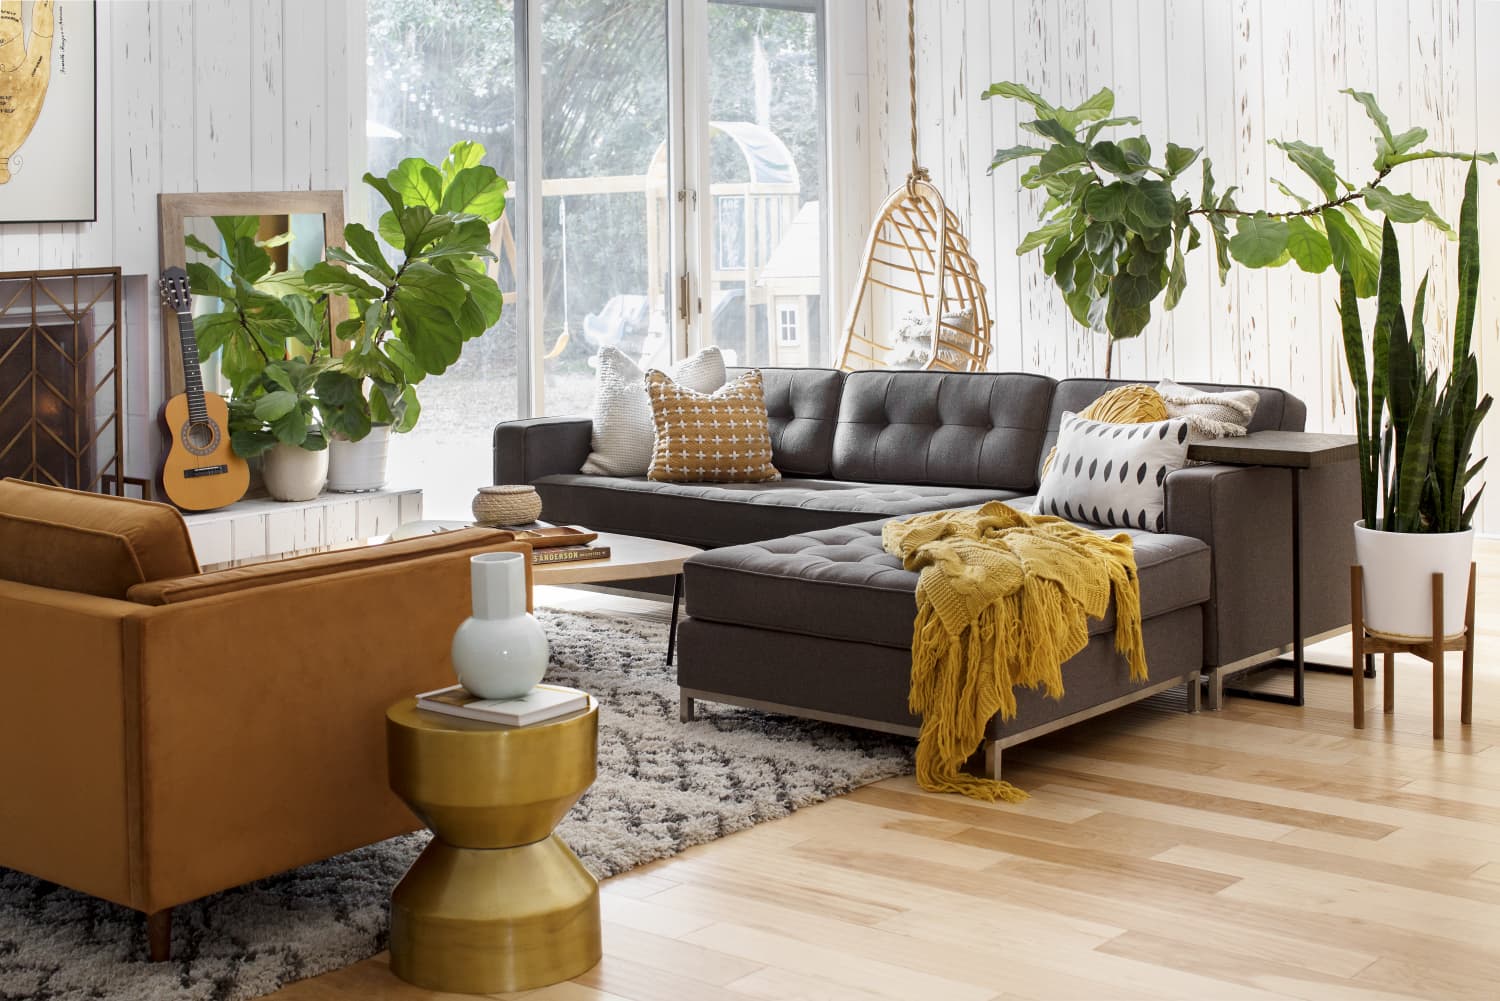 The Real Difference of a Living Room vs. a Family Room